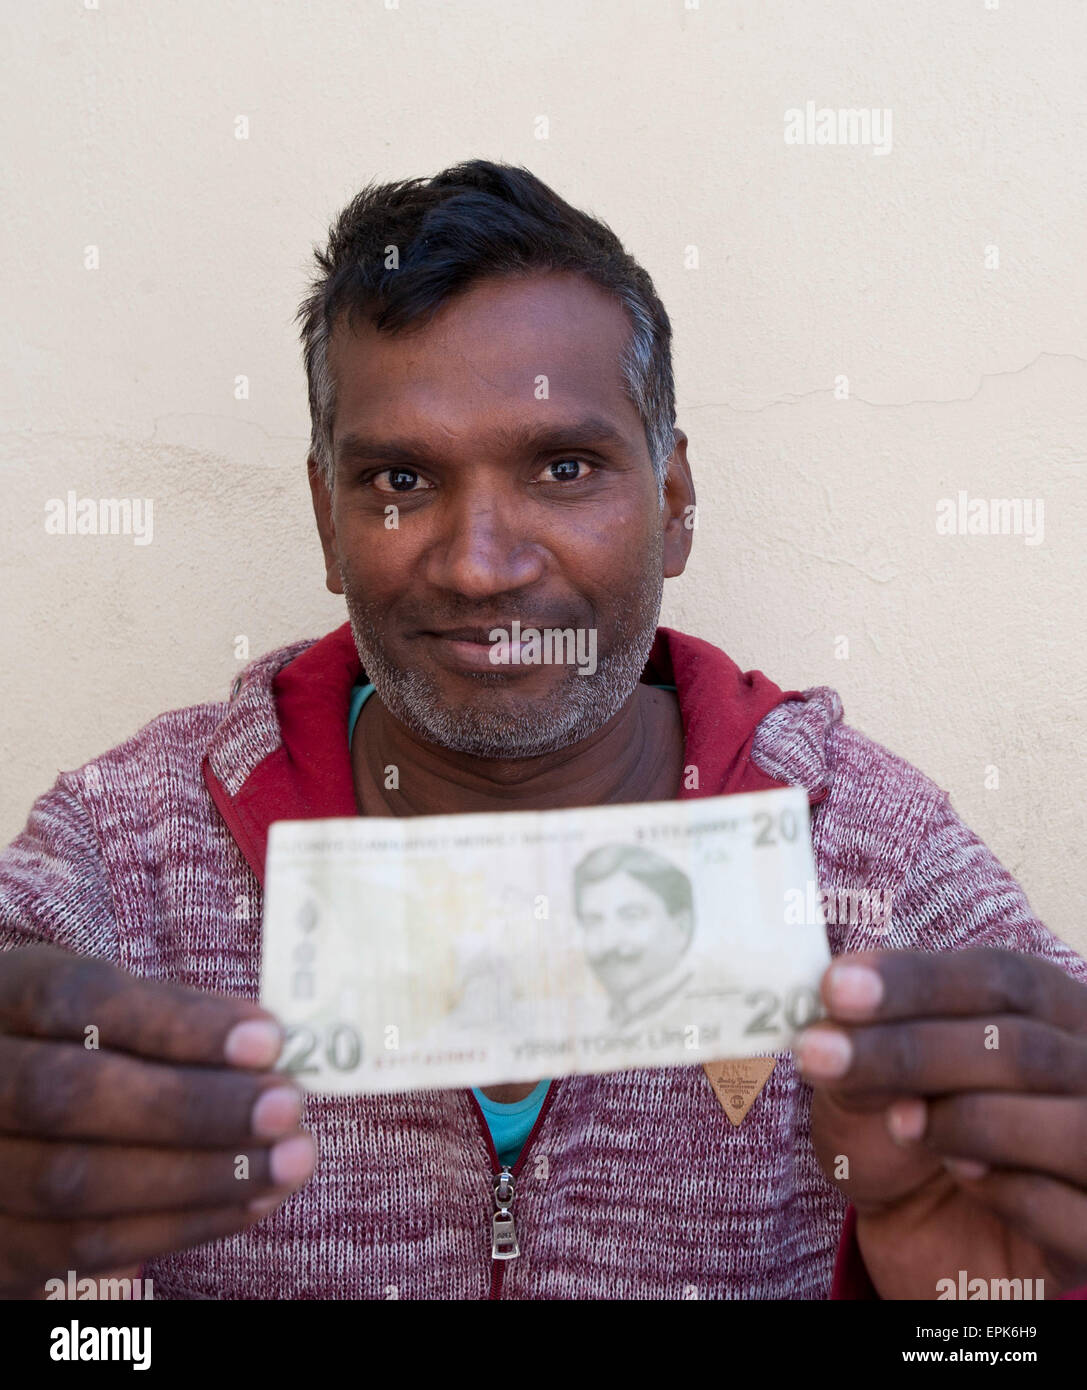 (150519) -- CHIOS, May 19, 2015 (Xinhua) -- An immigrant from Pakistan via Turkey shows a piece of Turkish money in front of the Chios police station, Chios, Greece, May 11, 2015. Chios is a short sea passage to the European Union, opposite Turkey, 8 km in a straight line. It is one of the islands which have seen traffic increase exponentially, with more than 6,000 immigrants rescued at sea last year and more than 5,000 in the first months of 2015 up to early May, according to the island Police. For over two years now, ever since the fence at the Greek-Turkish border of Evros was constructed,  Stock Photo